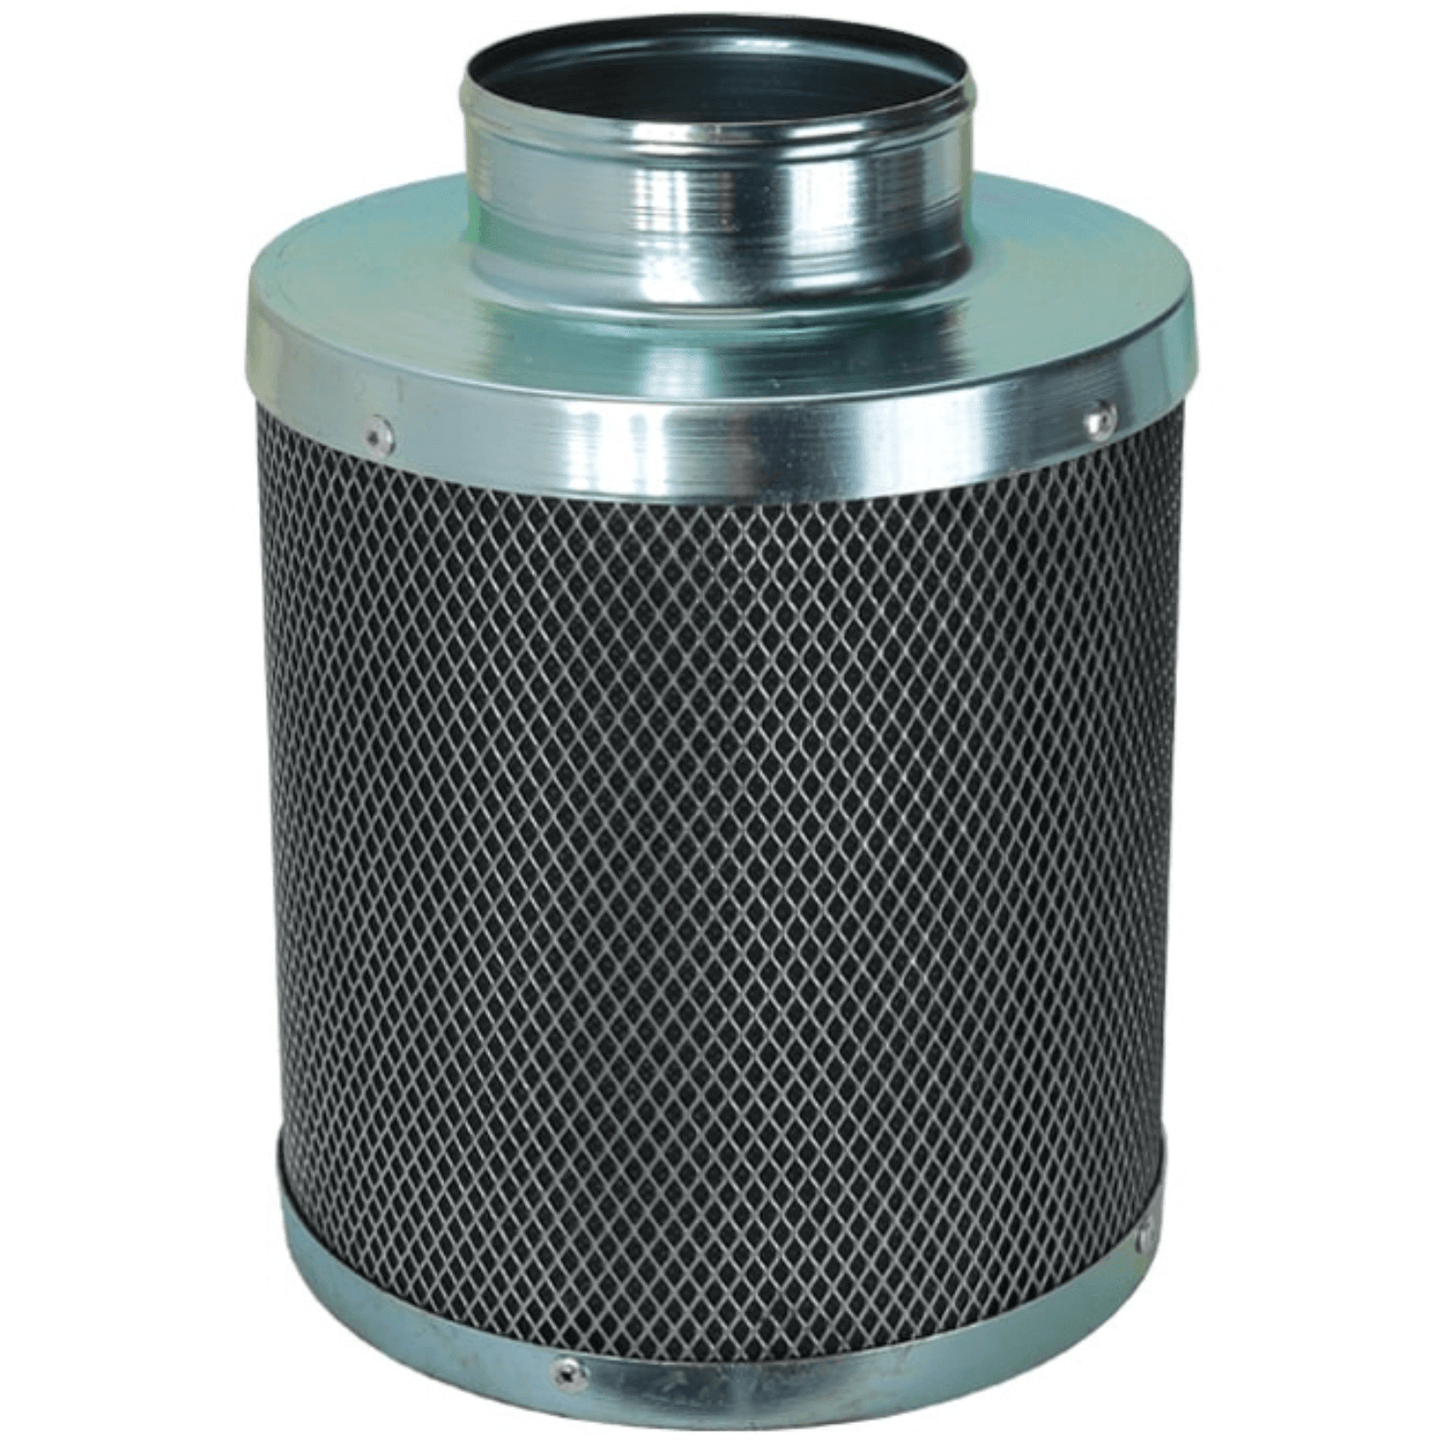 Charco Filters Plus 4" X 8" Activated Carbon Air Filter 971204 Climate Control 816731010061